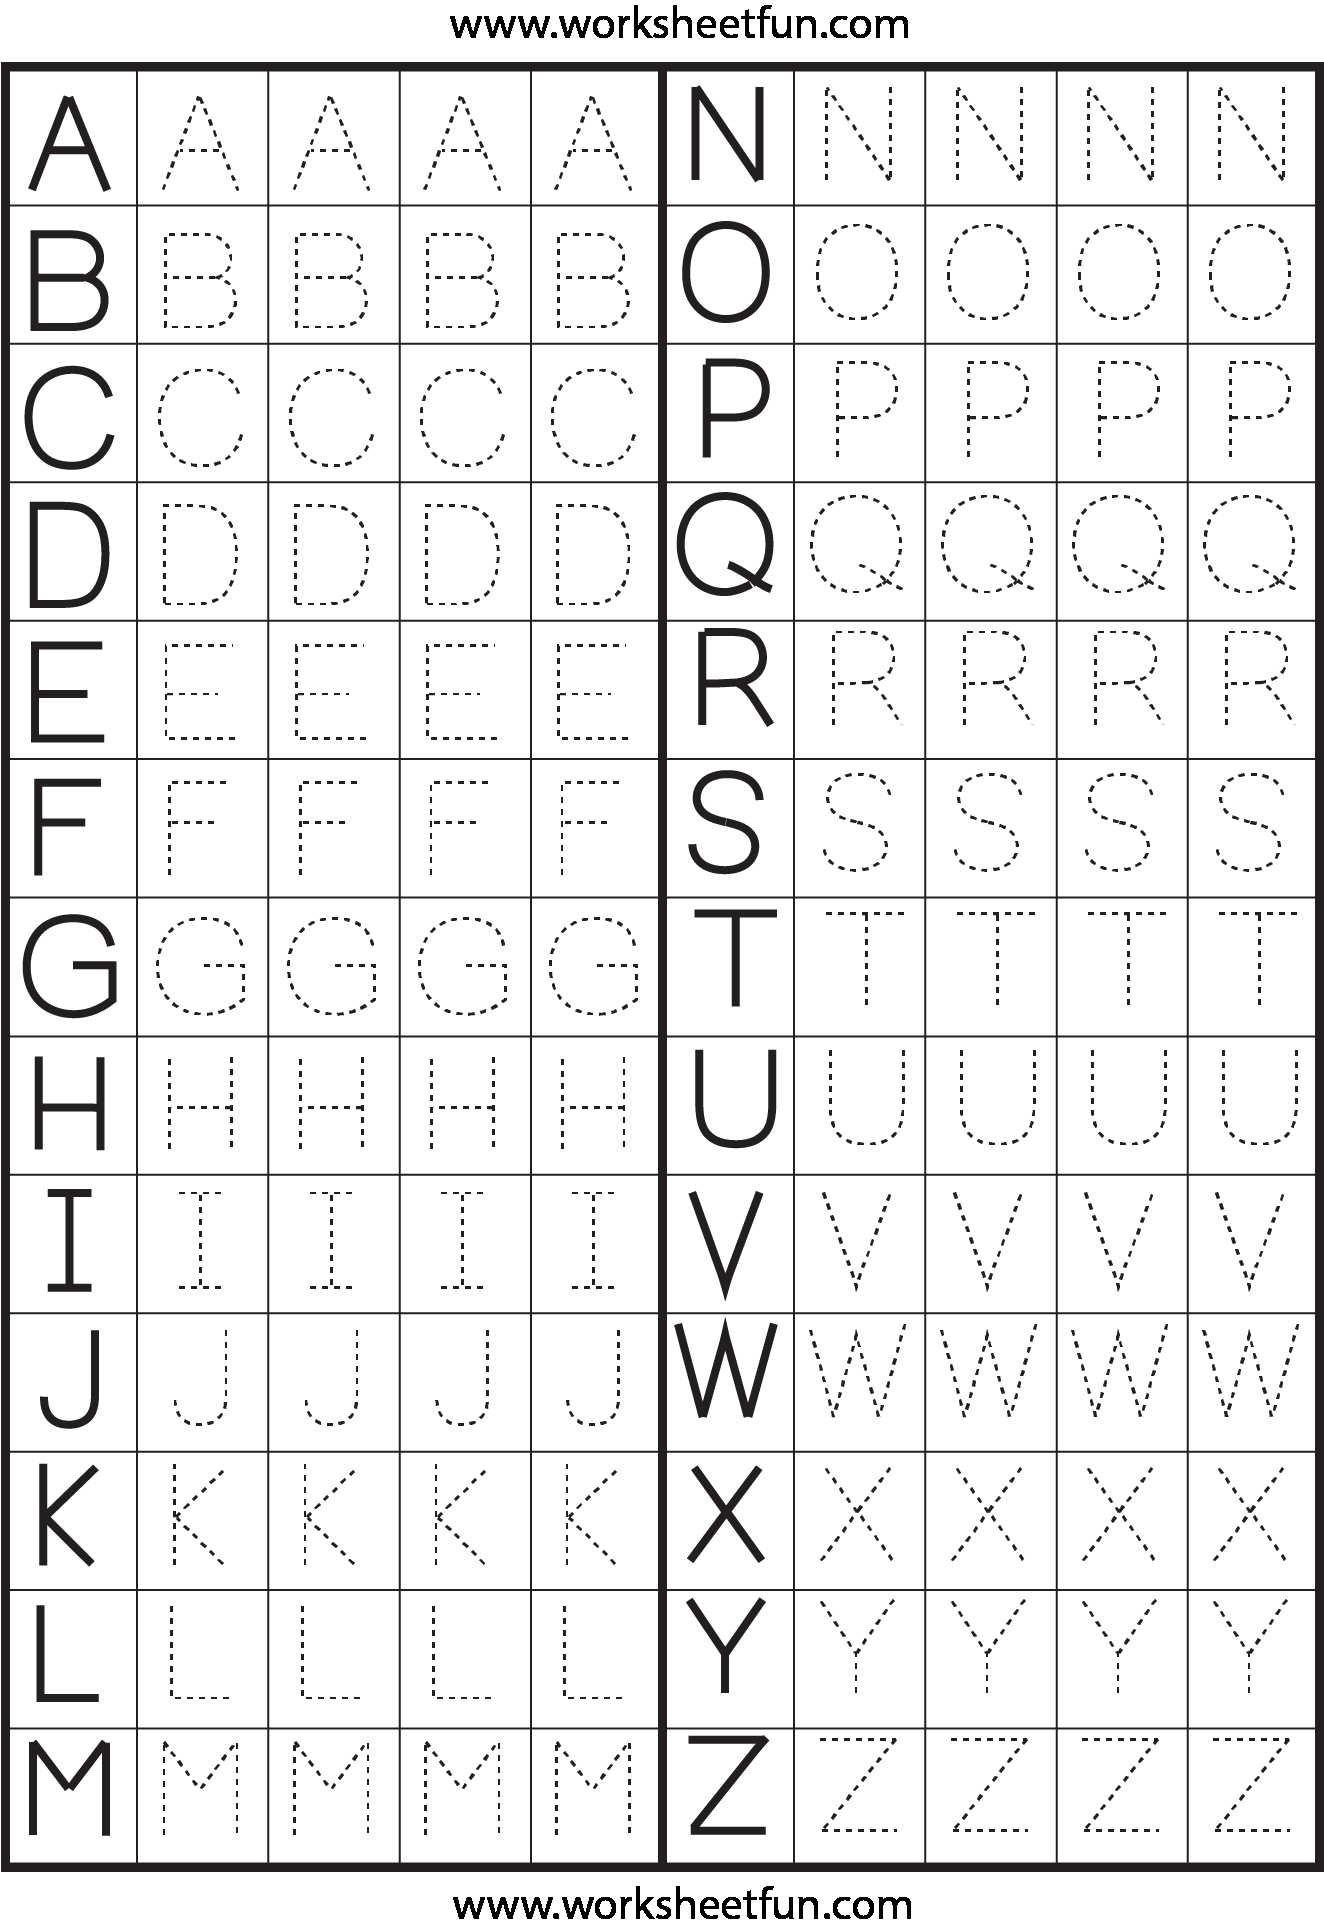 Missing Letters Worksheets together with Free Worksheets Library Download and Print Worksheets